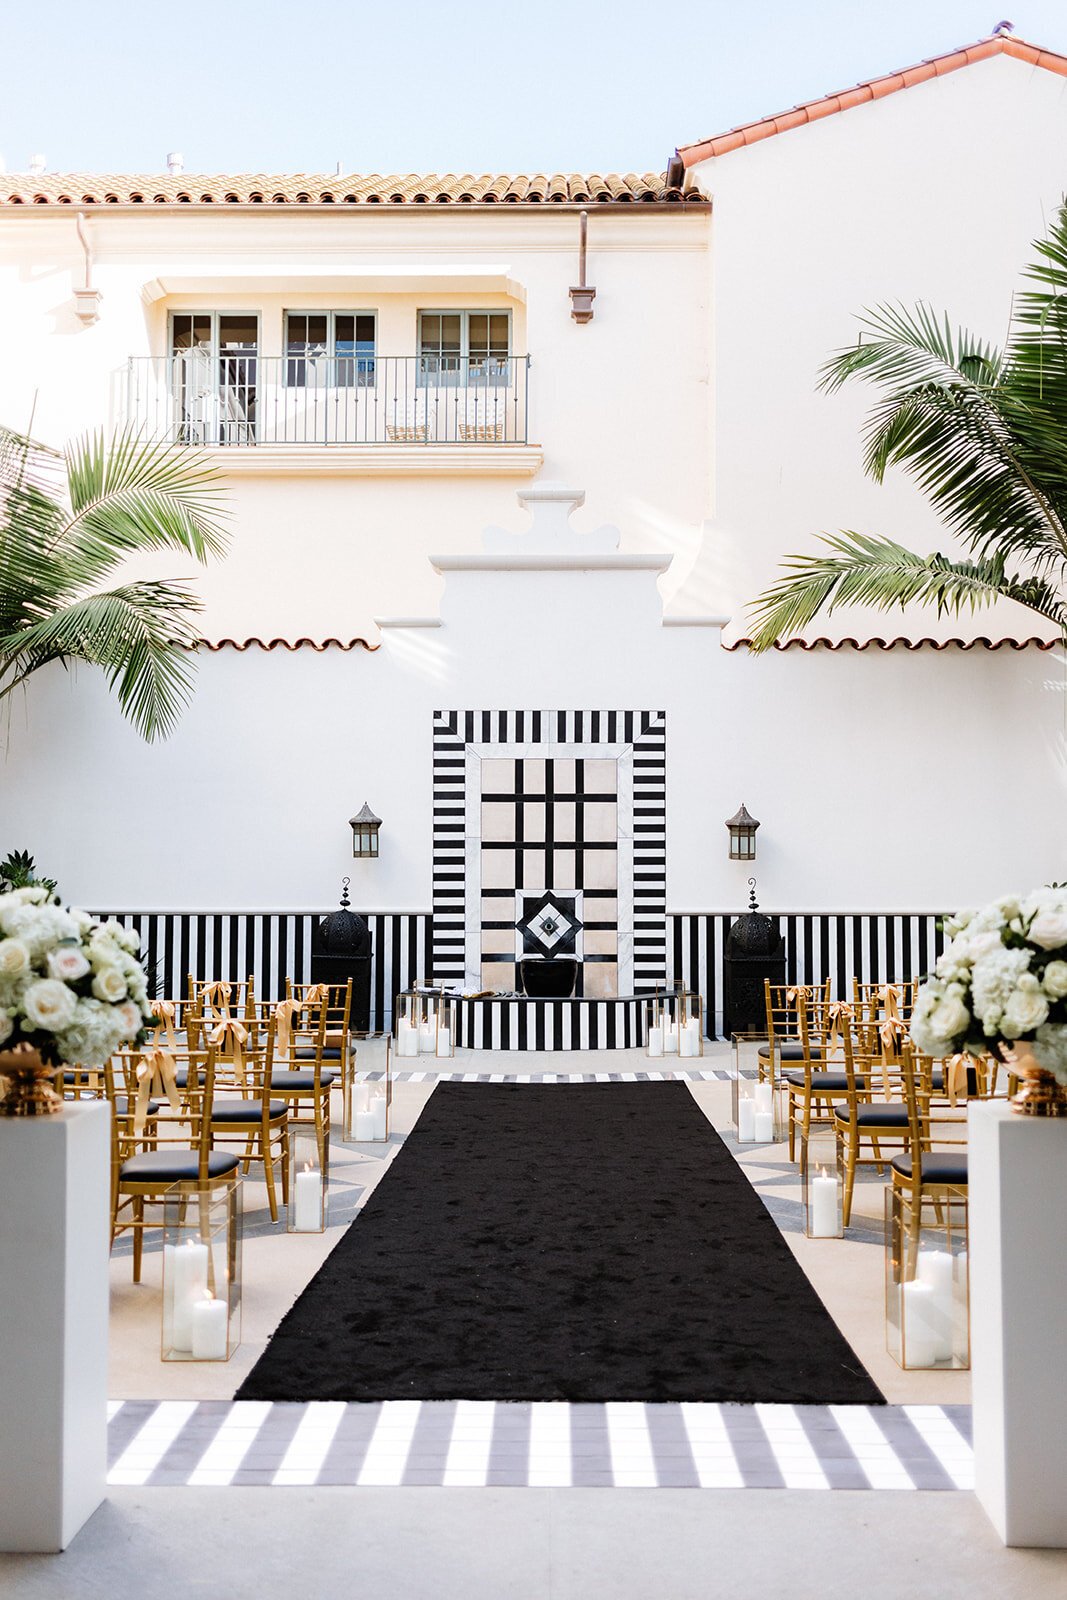 www.santabarbarawedding.com | Sunwest Video | Tangled Lotus | Ceremony Aisle with Black and White Decor and Black Aisle Runner